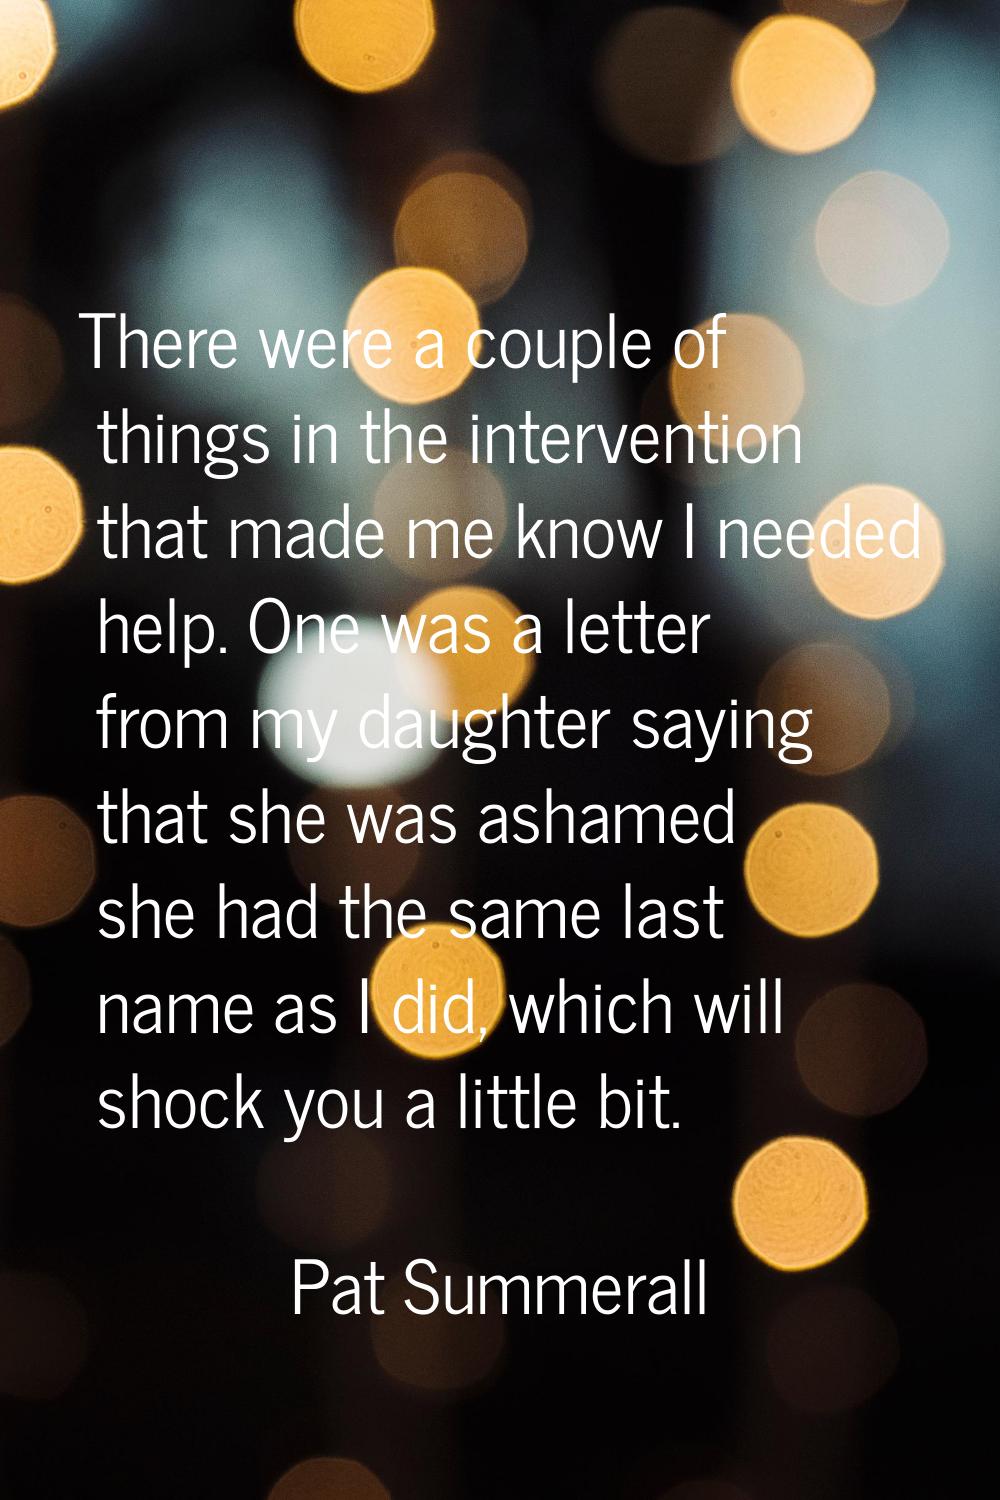 There were a couple of things in the intervention that made me know I needed help. One was a letter